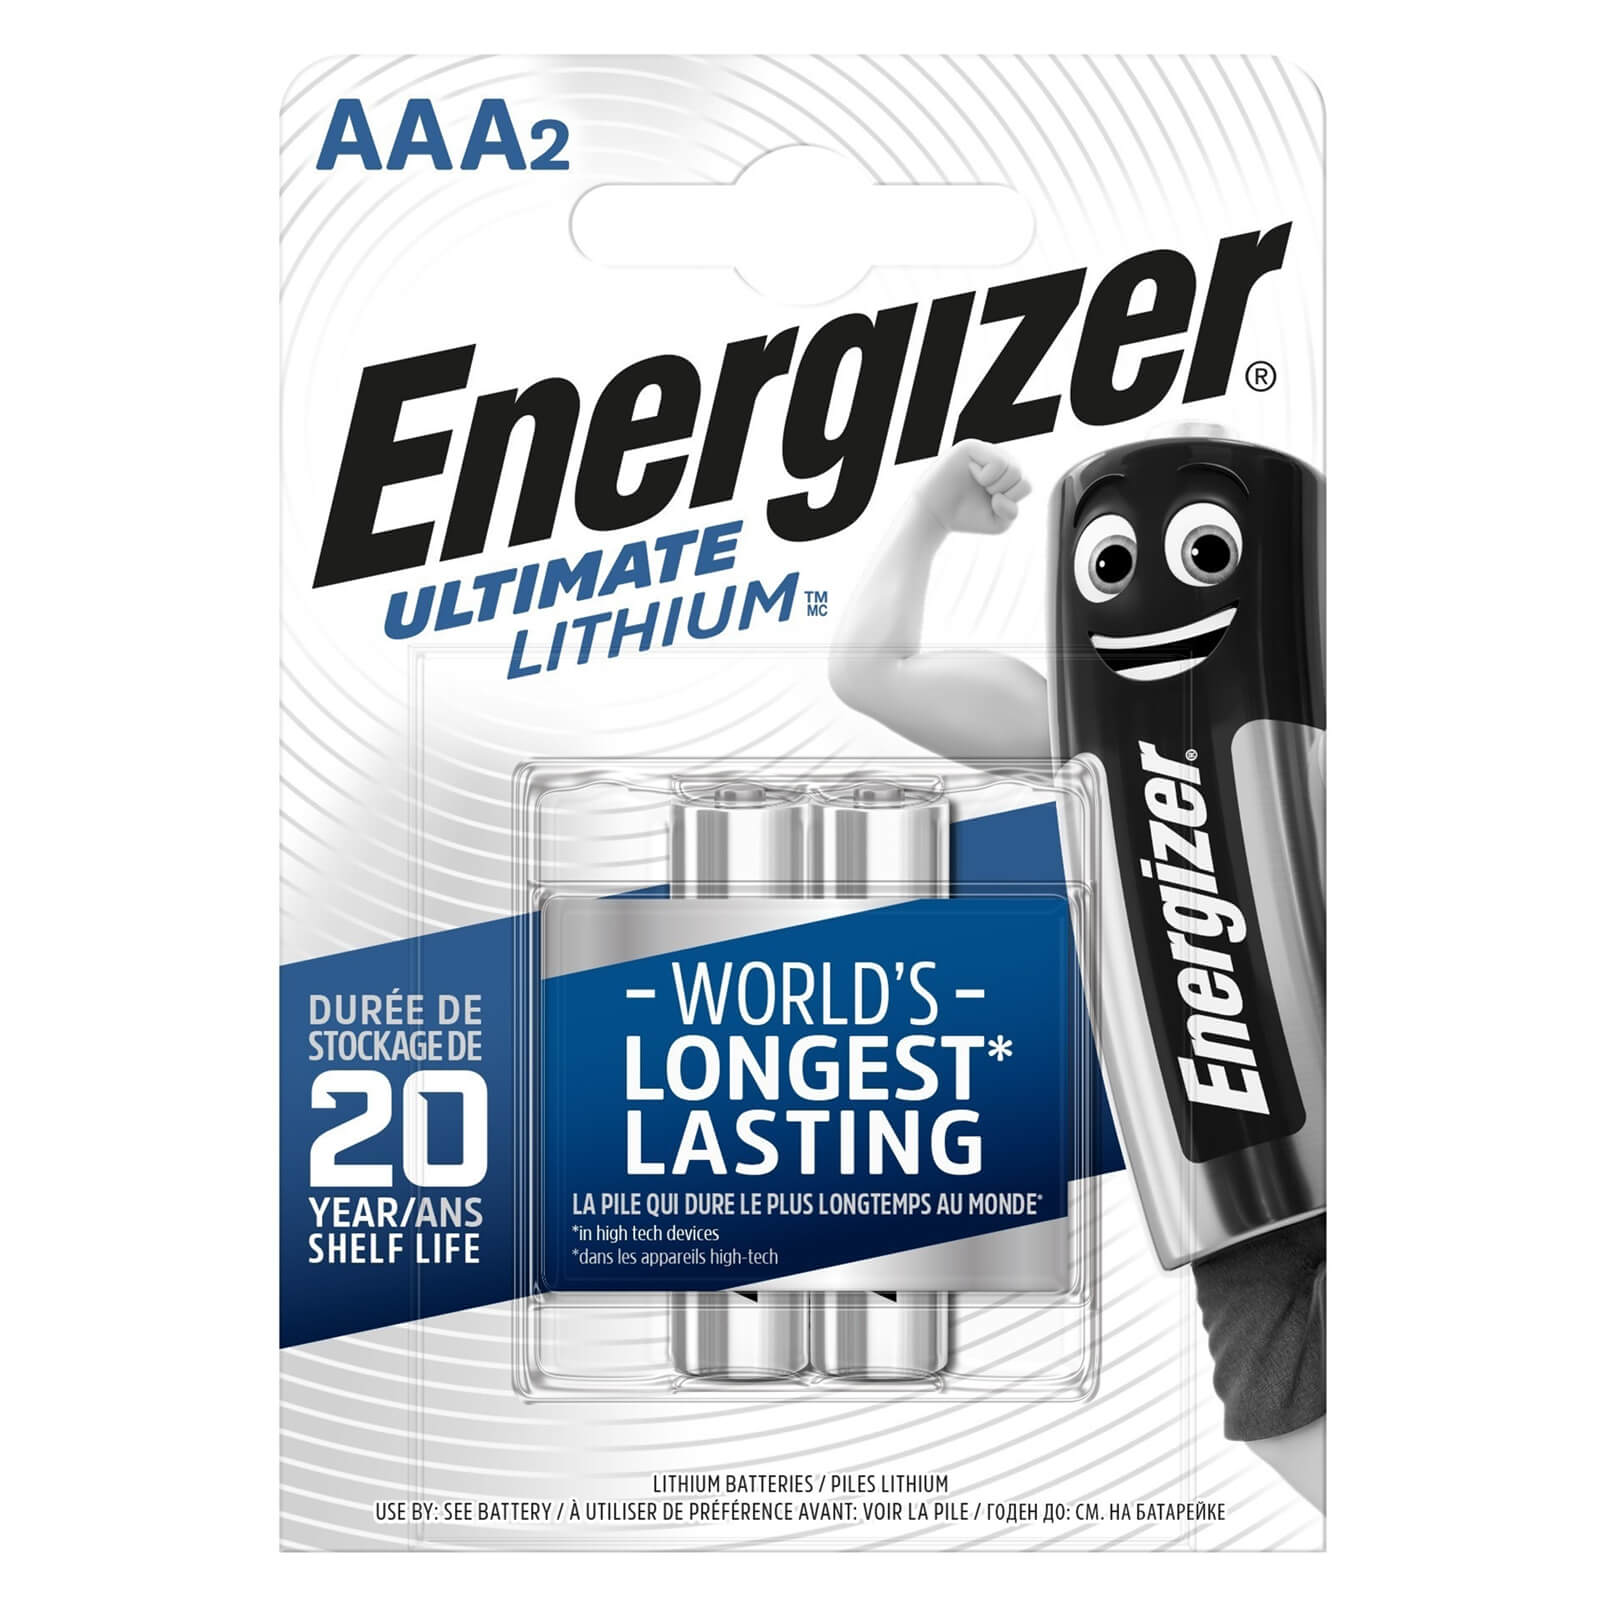 Energizer Ultimate Lithium AAA Batteries - 2 Pack